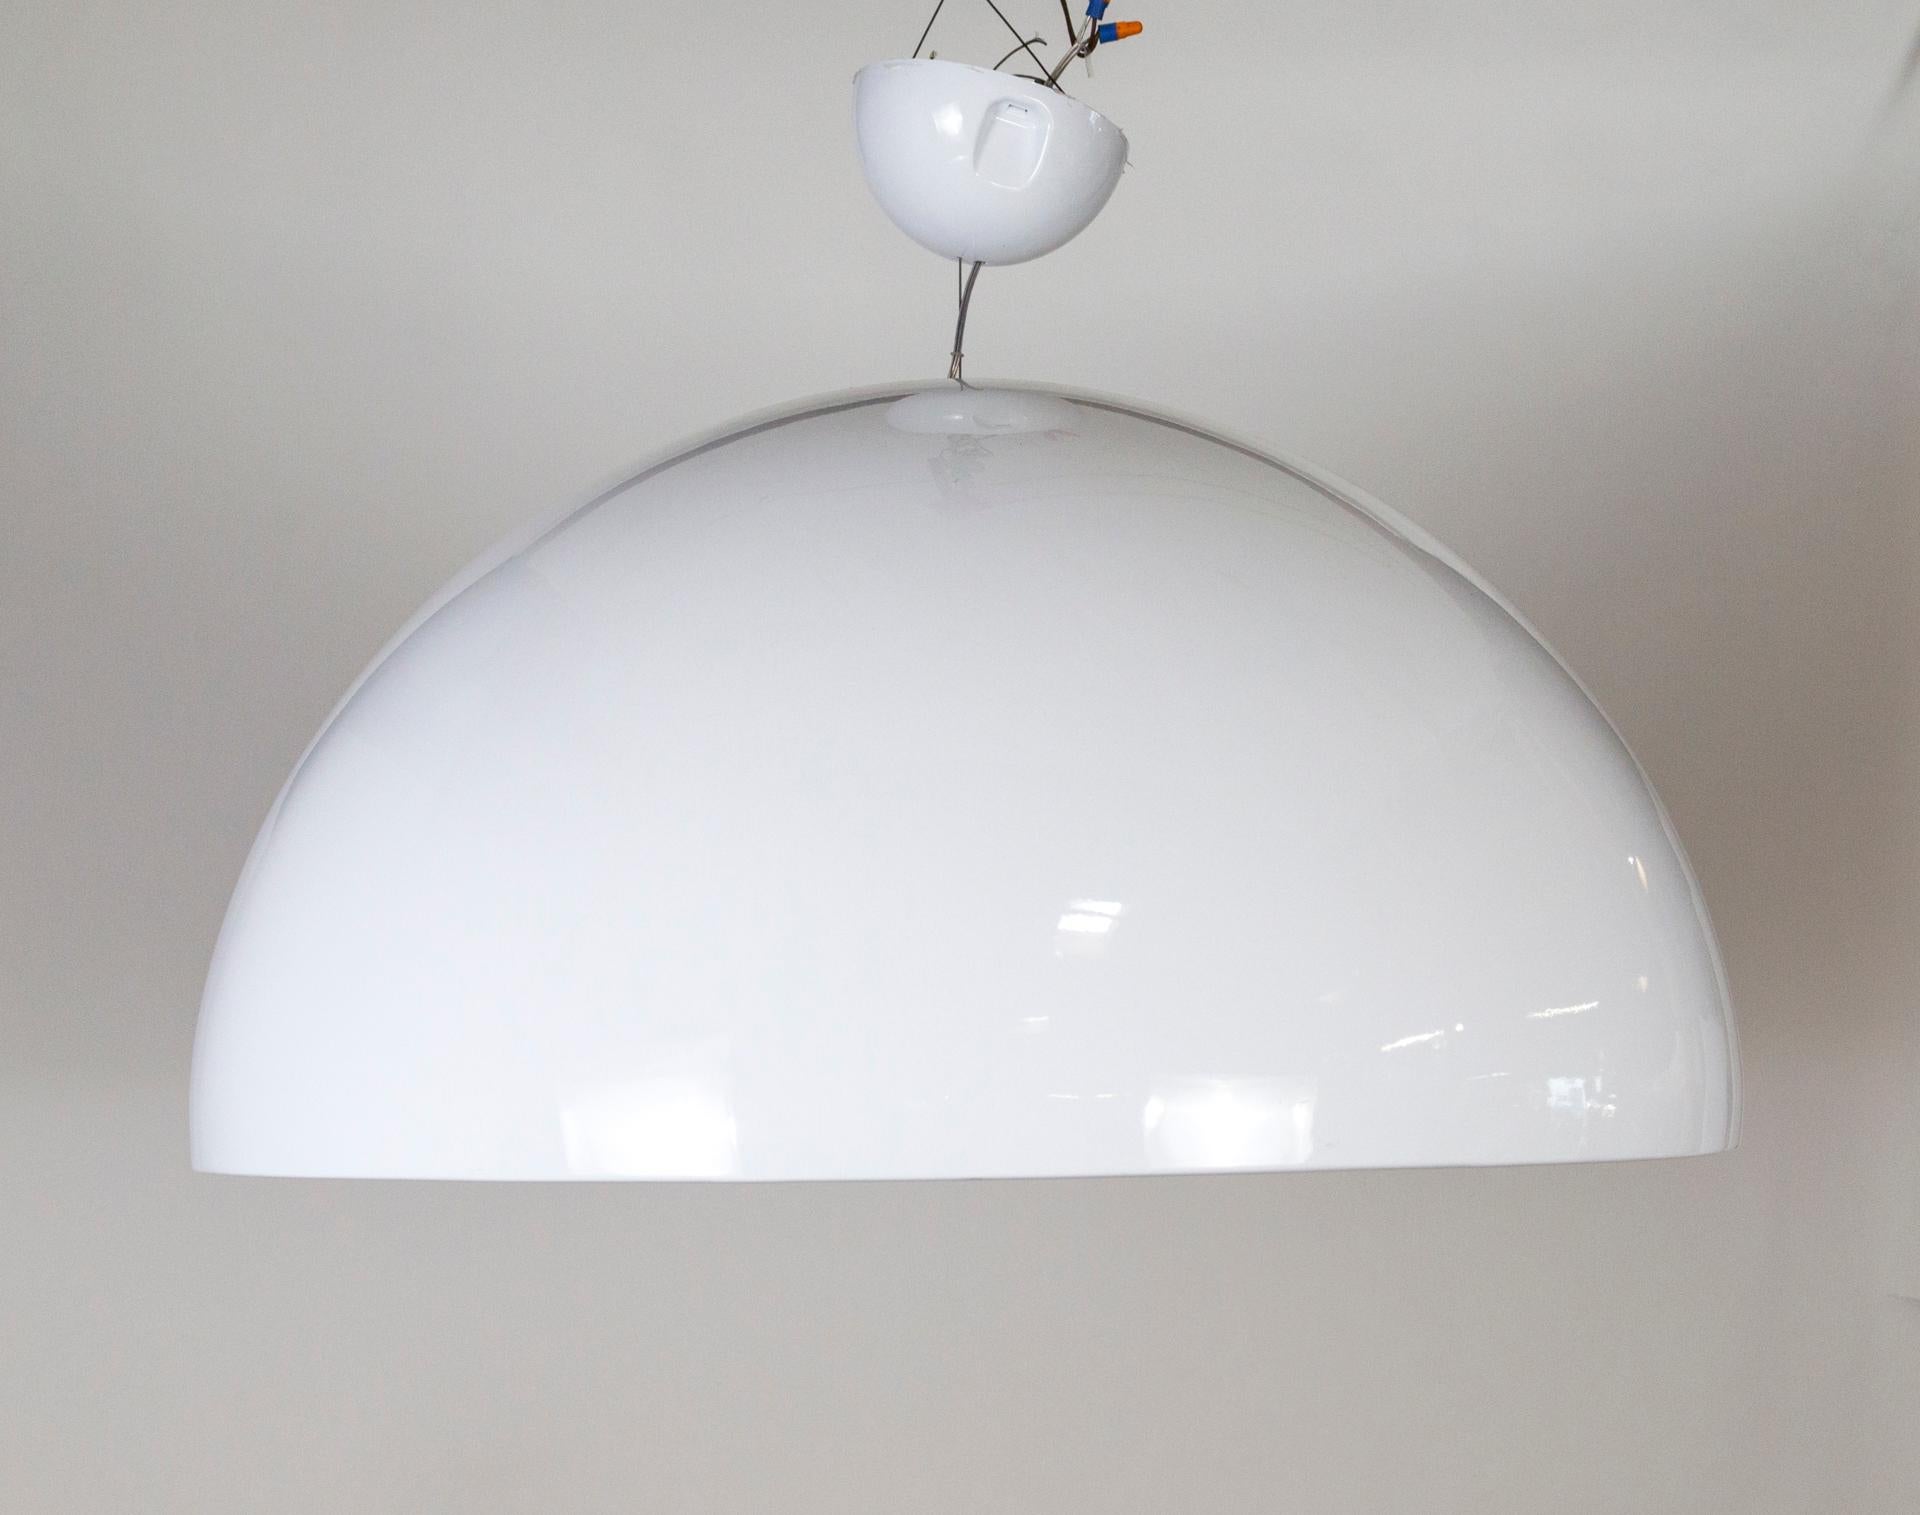 Large White Skygarden Dome Pendant Light by Flos, Marcel Wanders 2